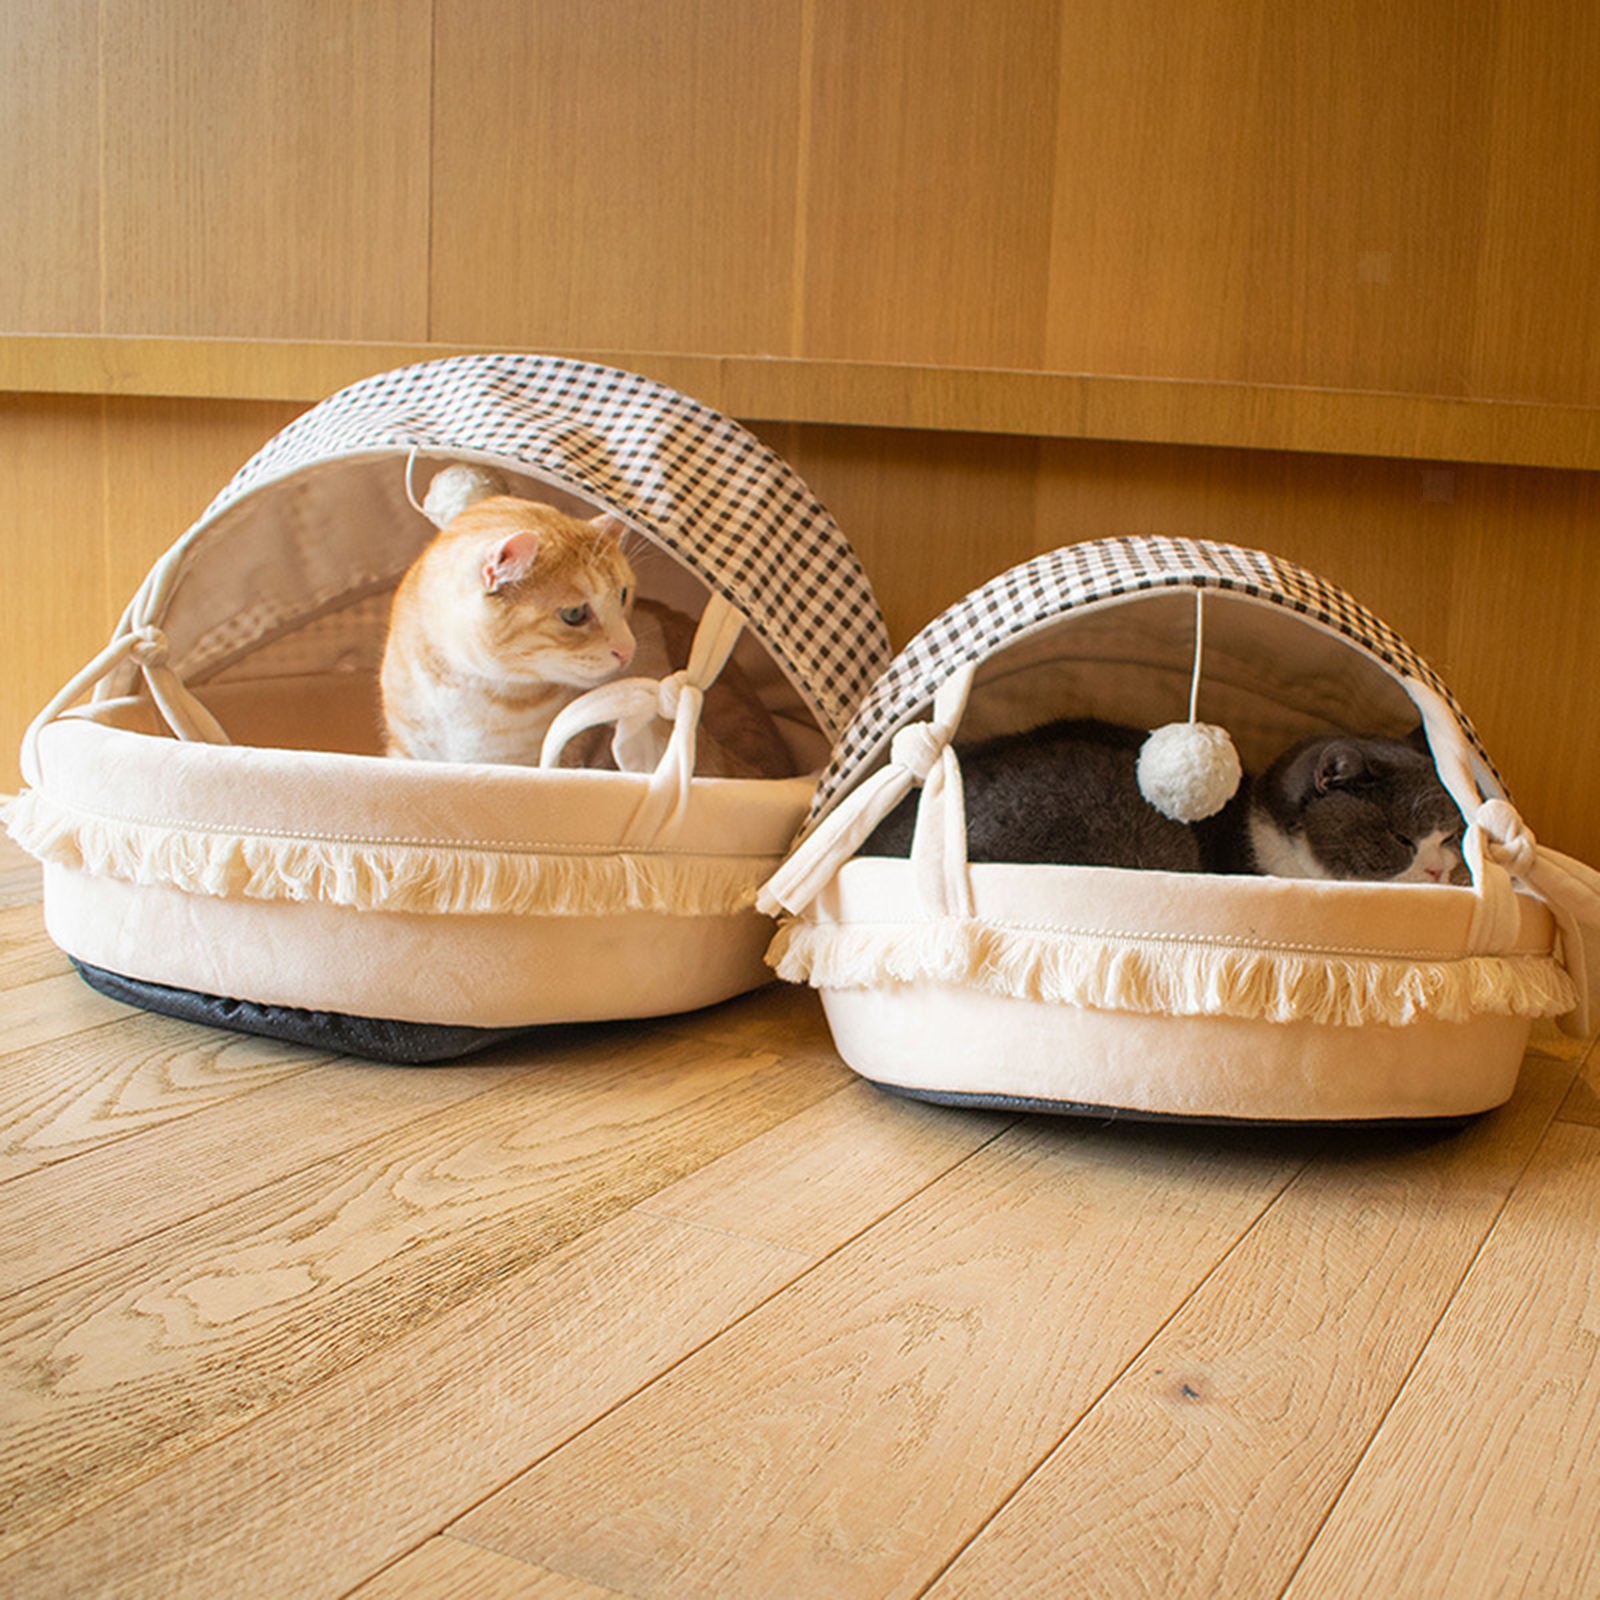 Pet Bed Sleeping Bed with Foldable Cover Soft Plush Pet Nest Bed for Rabbits